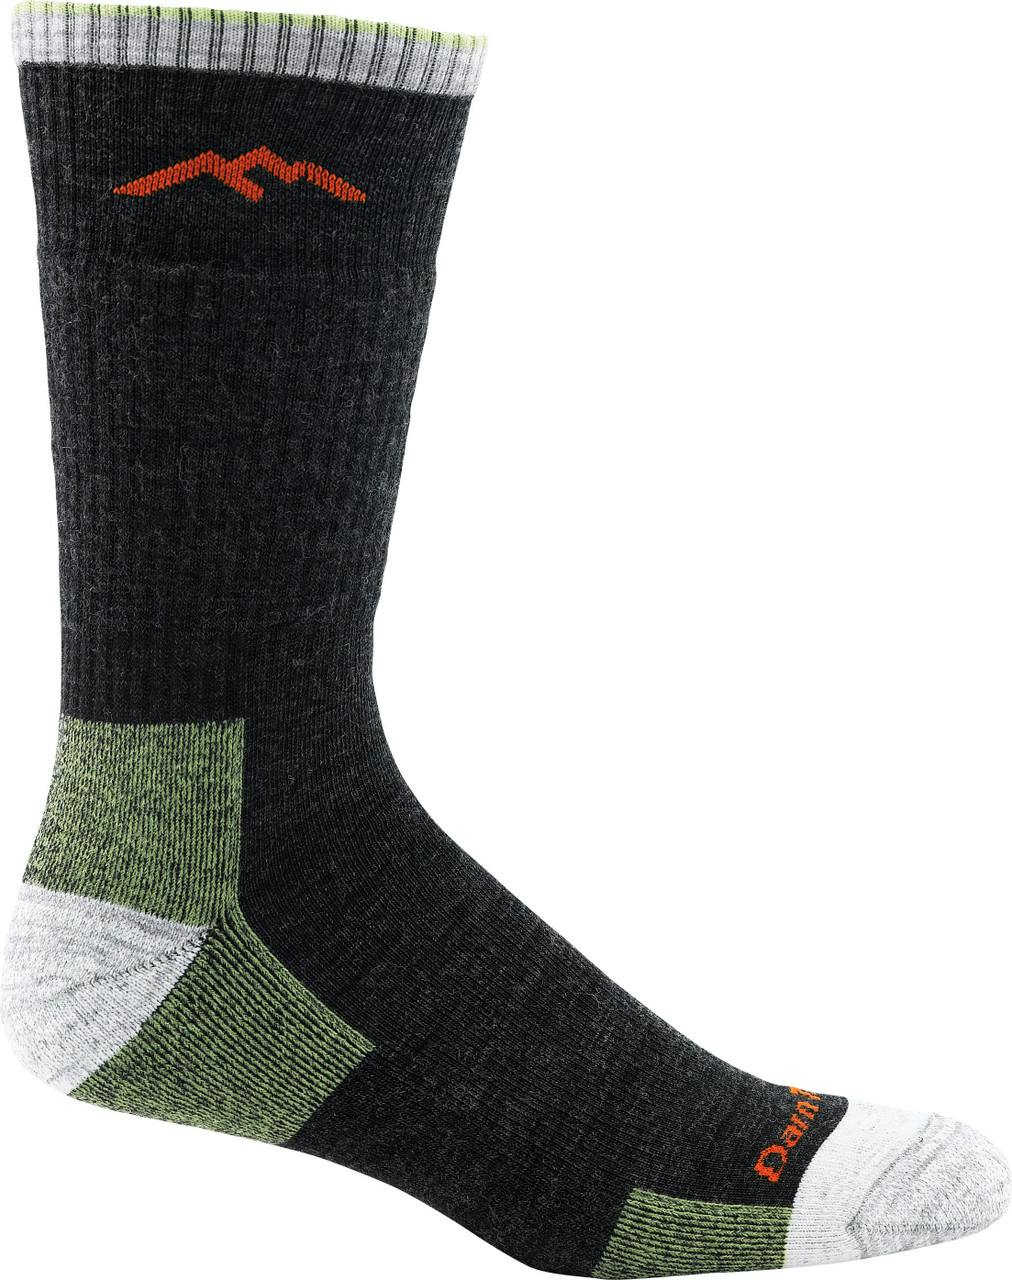 Midweight Hiker Boot Socks Lime